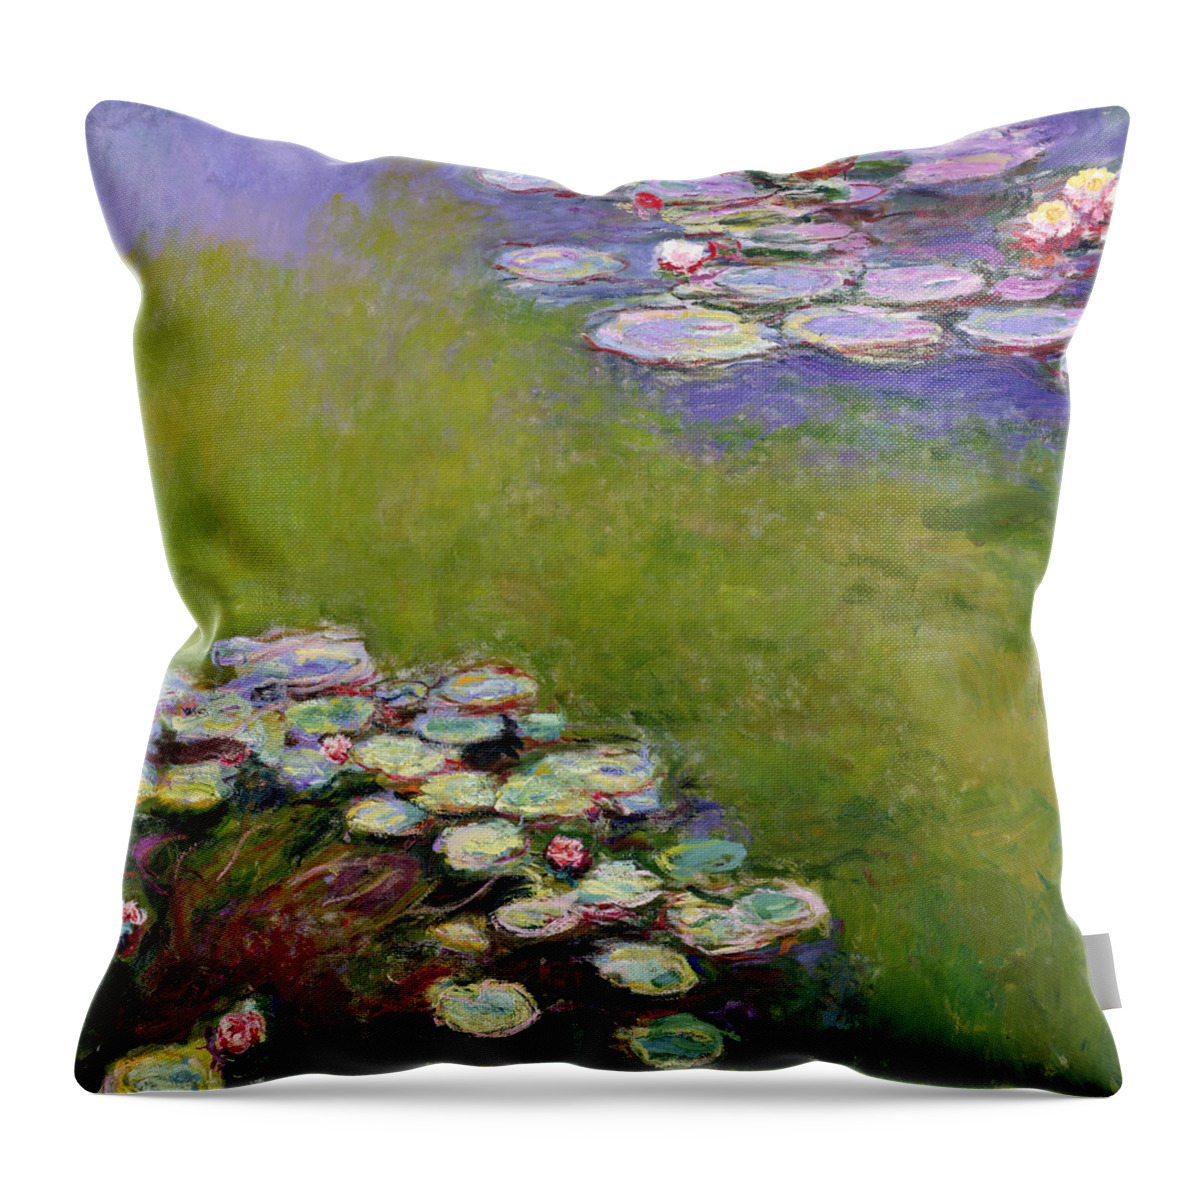  Monet Throw Pillow featuring the painting Waterlilies by Claude Monet